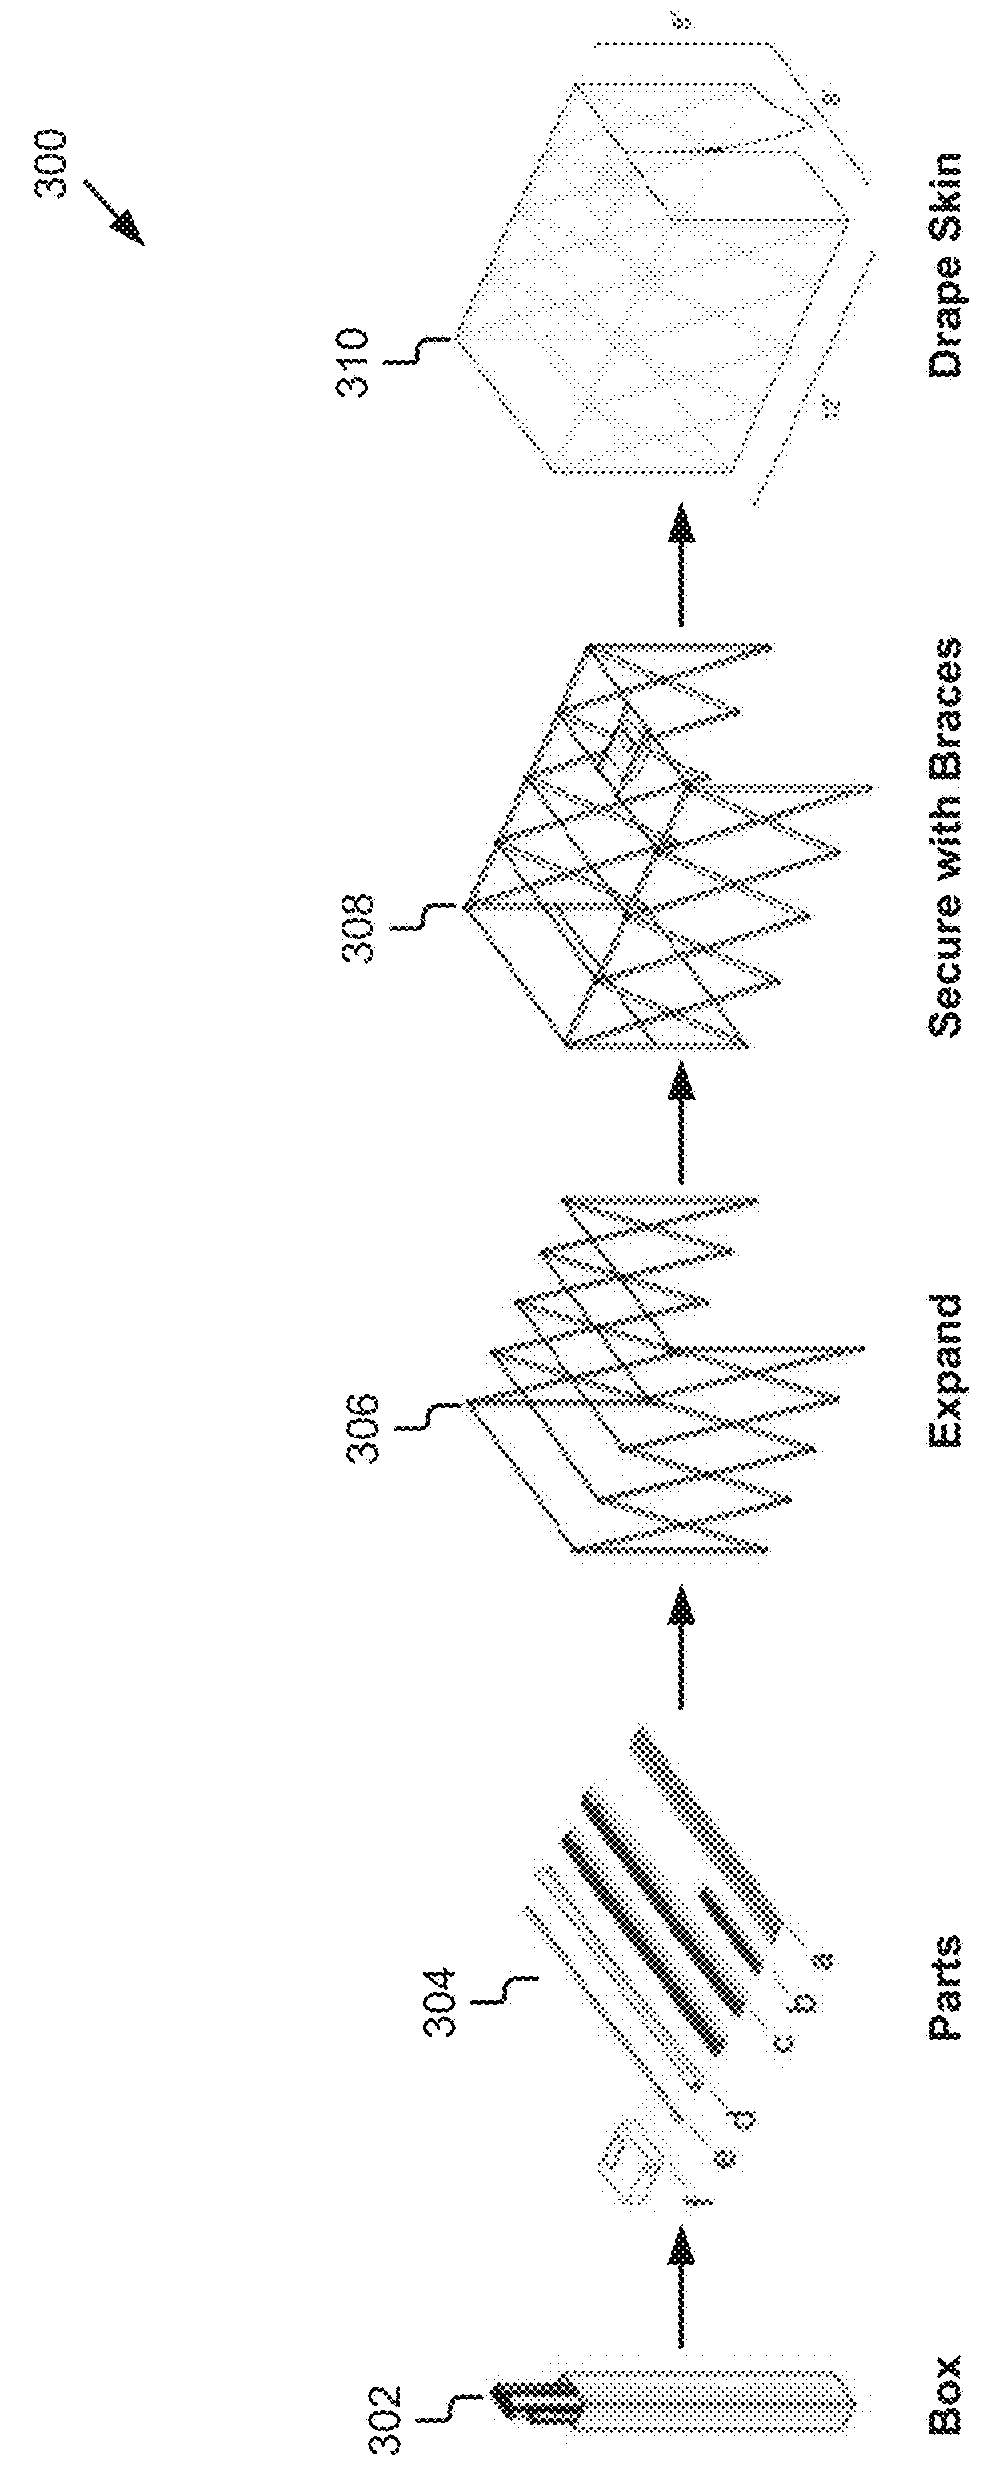 Network architecture for immersive audio-visual communications by temporary communication structures